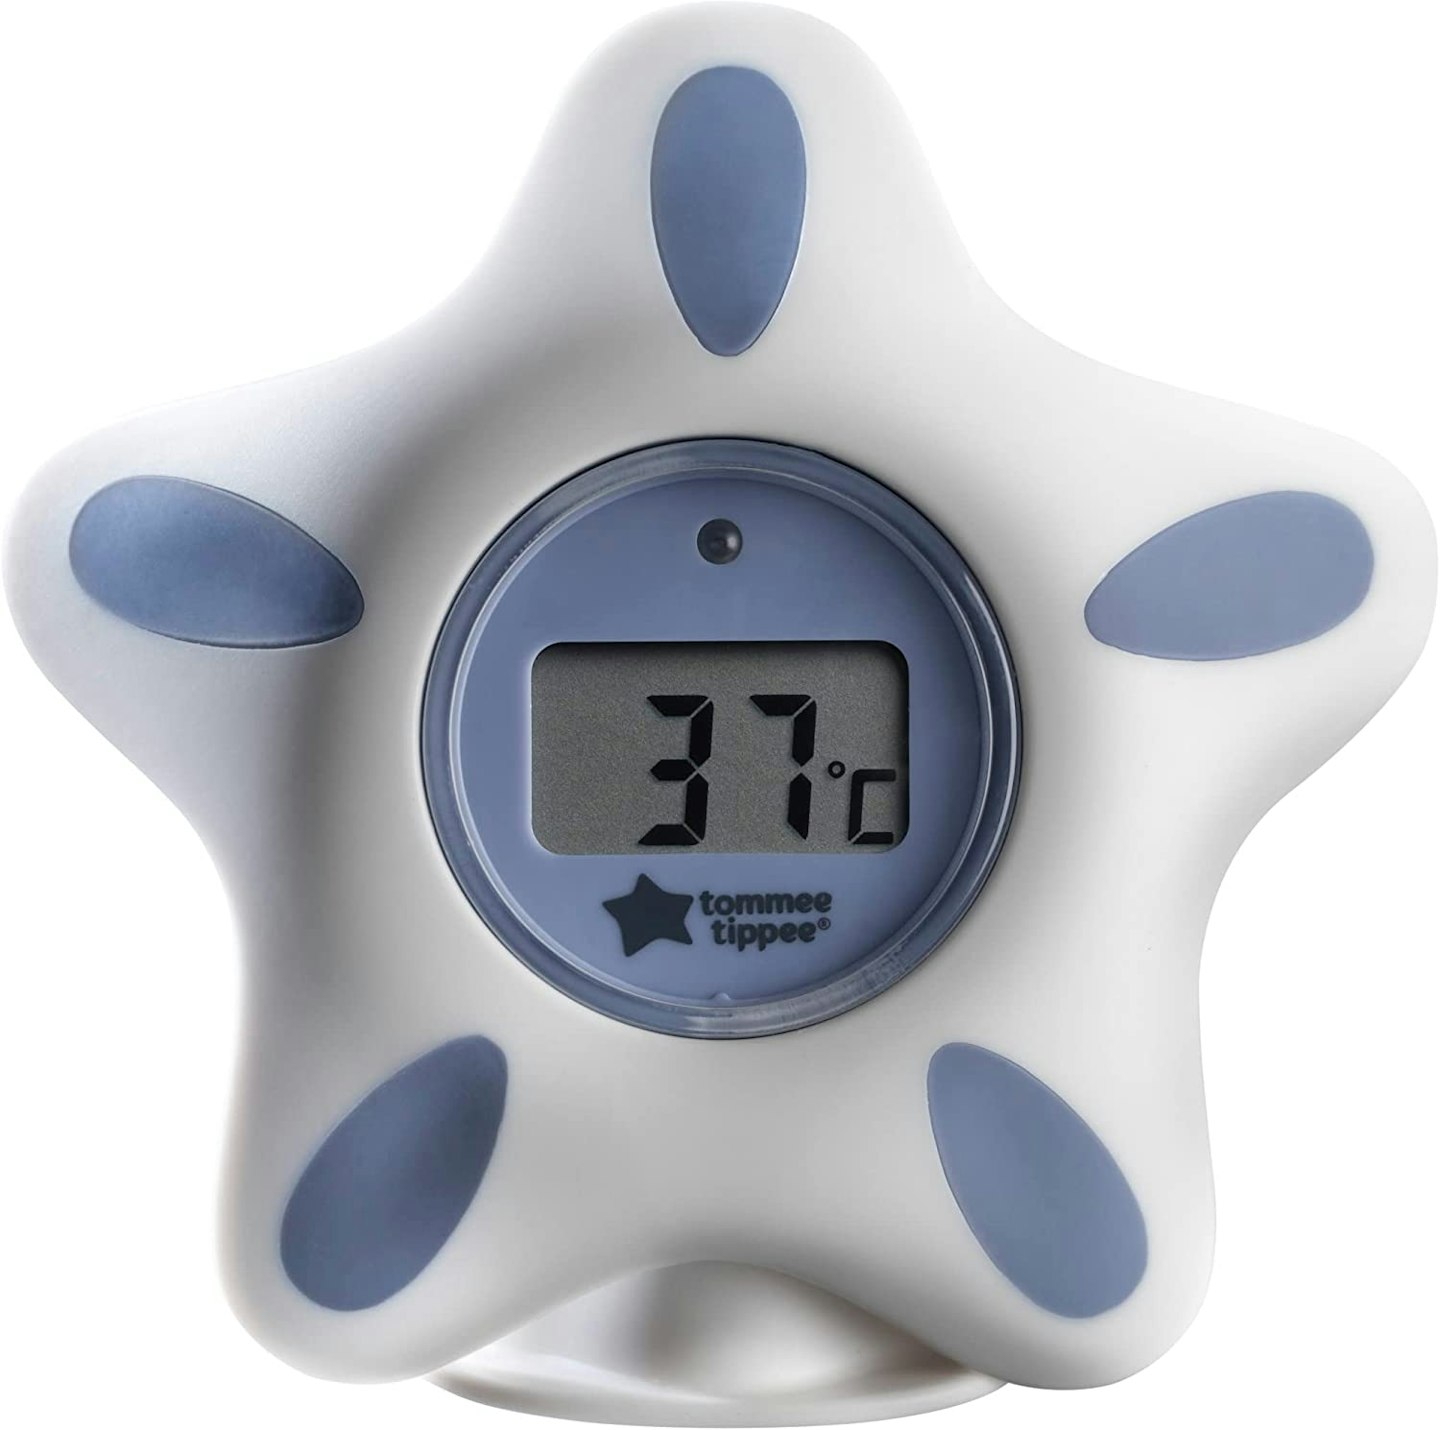 https://images.bauerhosting.com/affiliates/sites/12/2022/11/Tommee-Tippee-Closer-to-Nature-Bath-and-Room-Thermometer-1.jpg?auto=format&w=1440&q=80